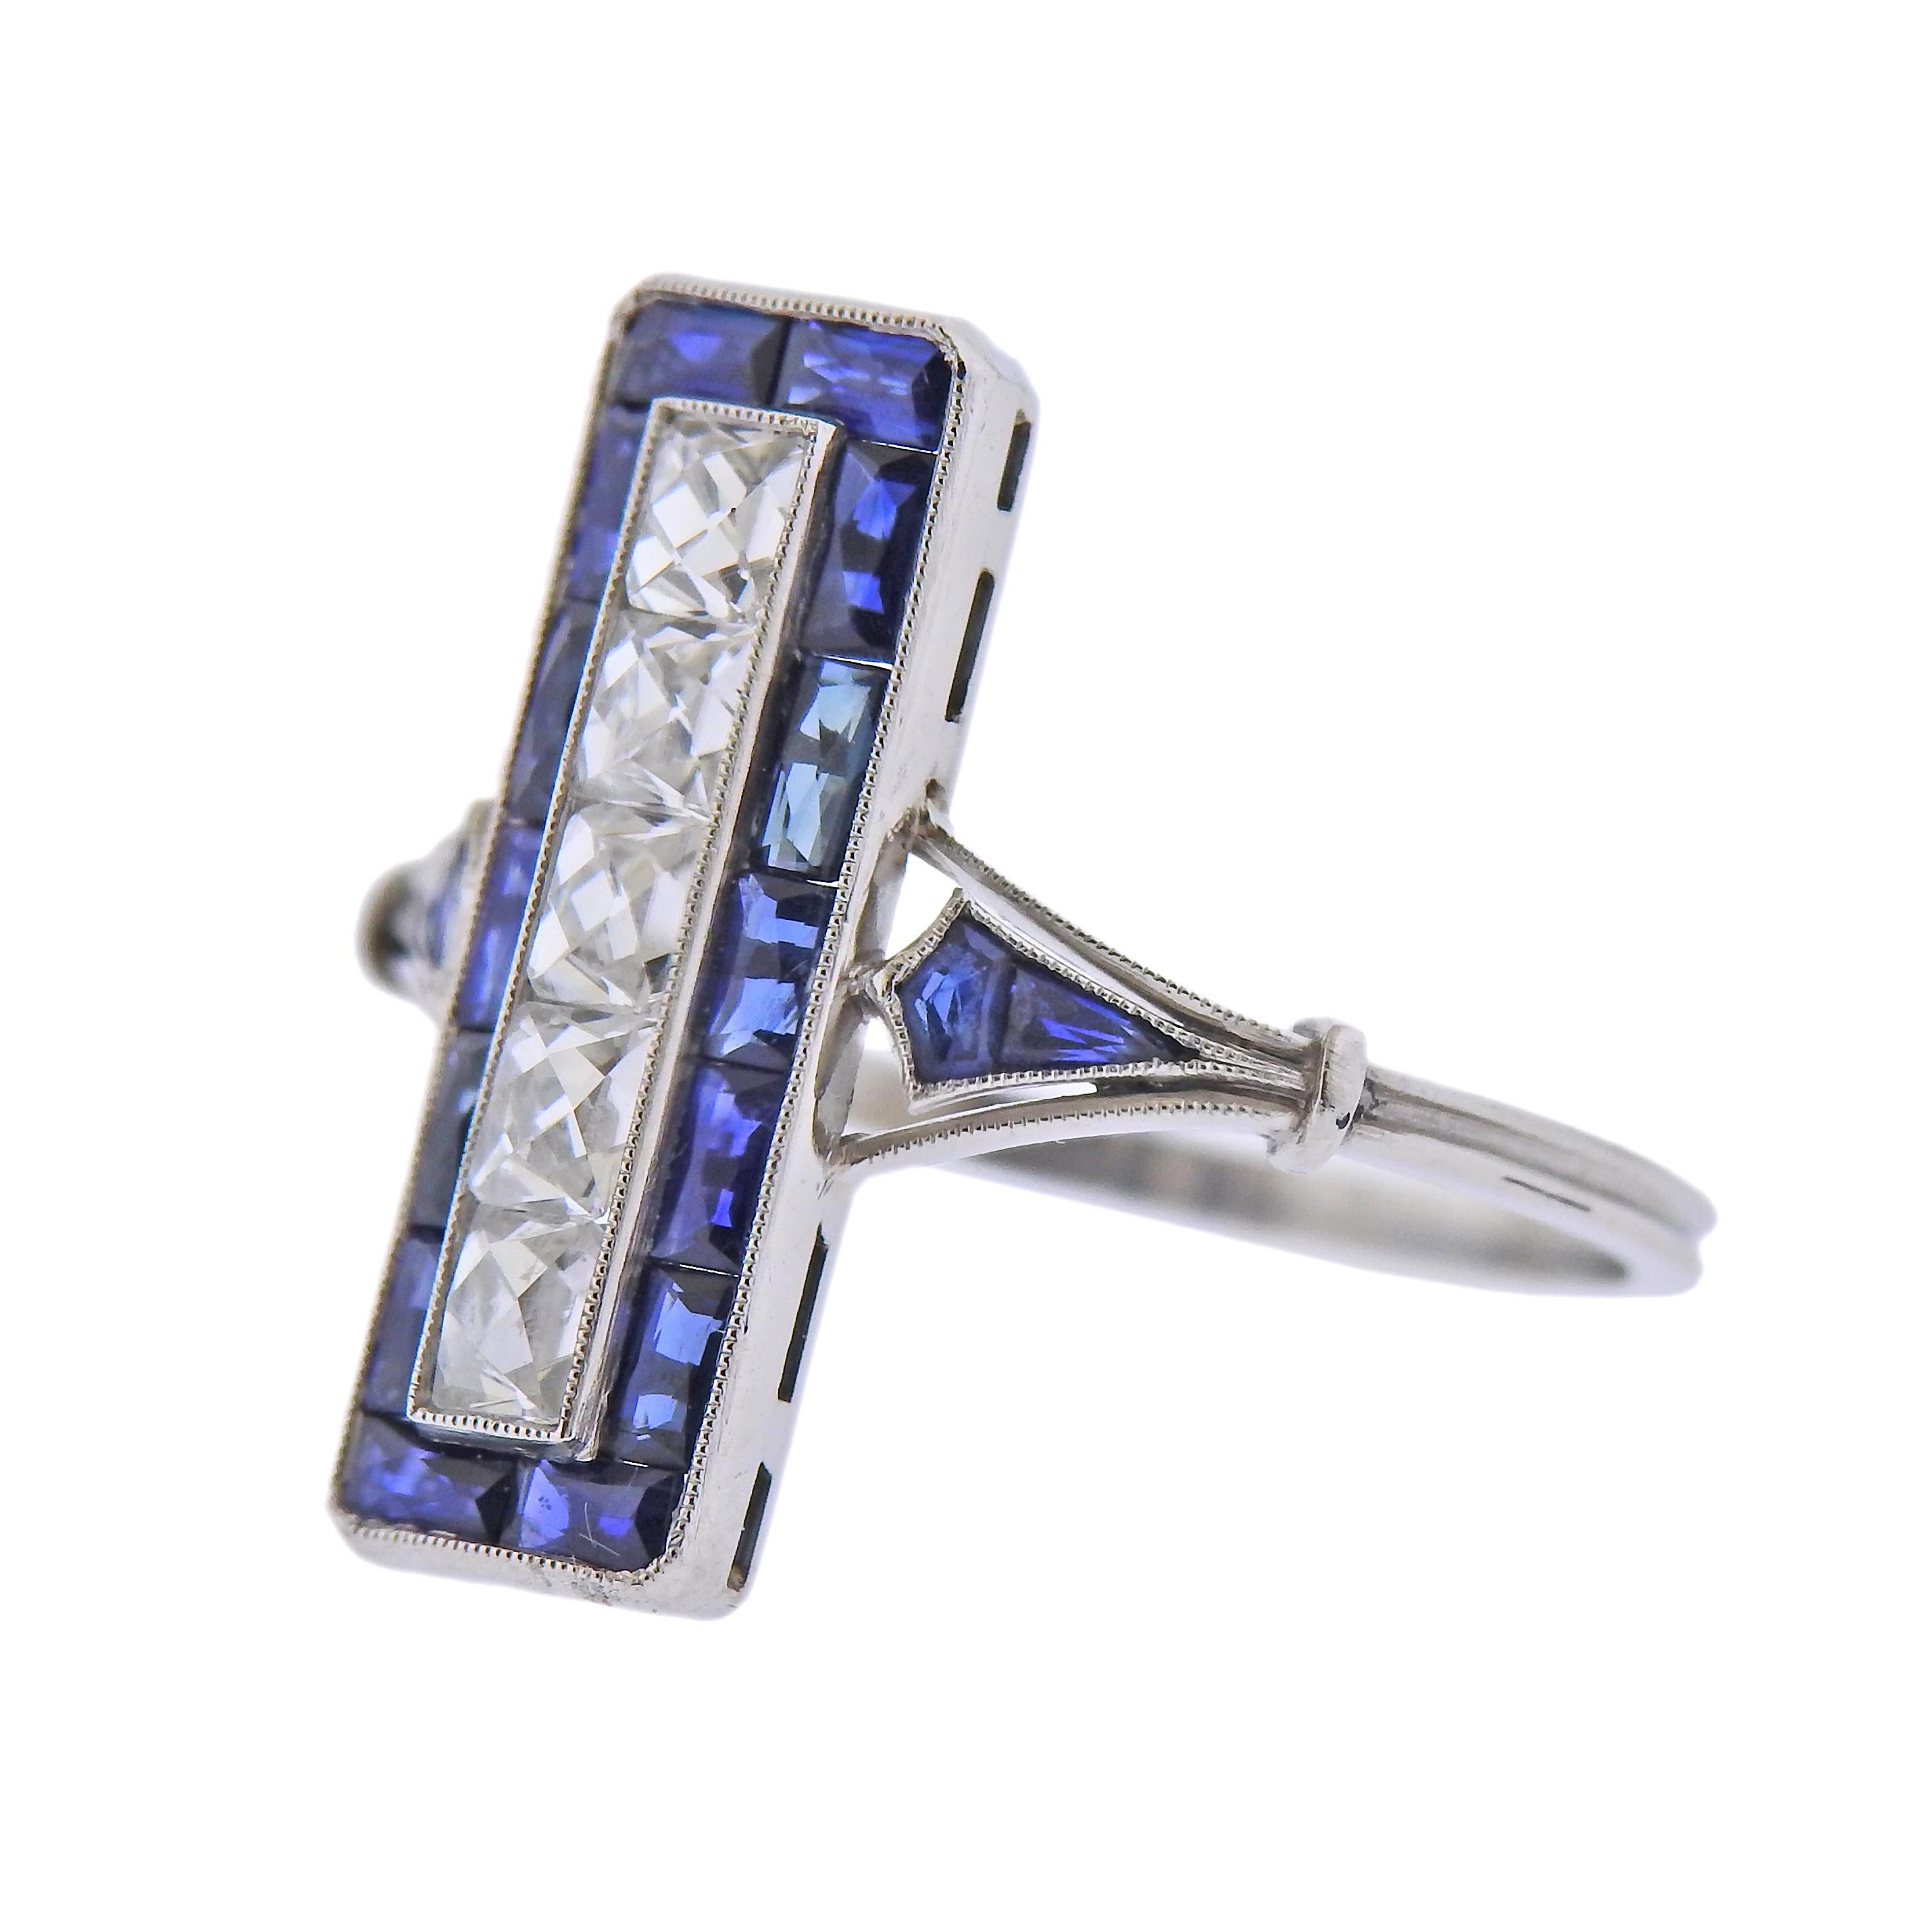 Deco style platinum ring with French cut sapphires and approx. 0.50cts in diamonds. Ring size - 7, ring top - 20mm x 7mm. Weight - 4.2 grams. 